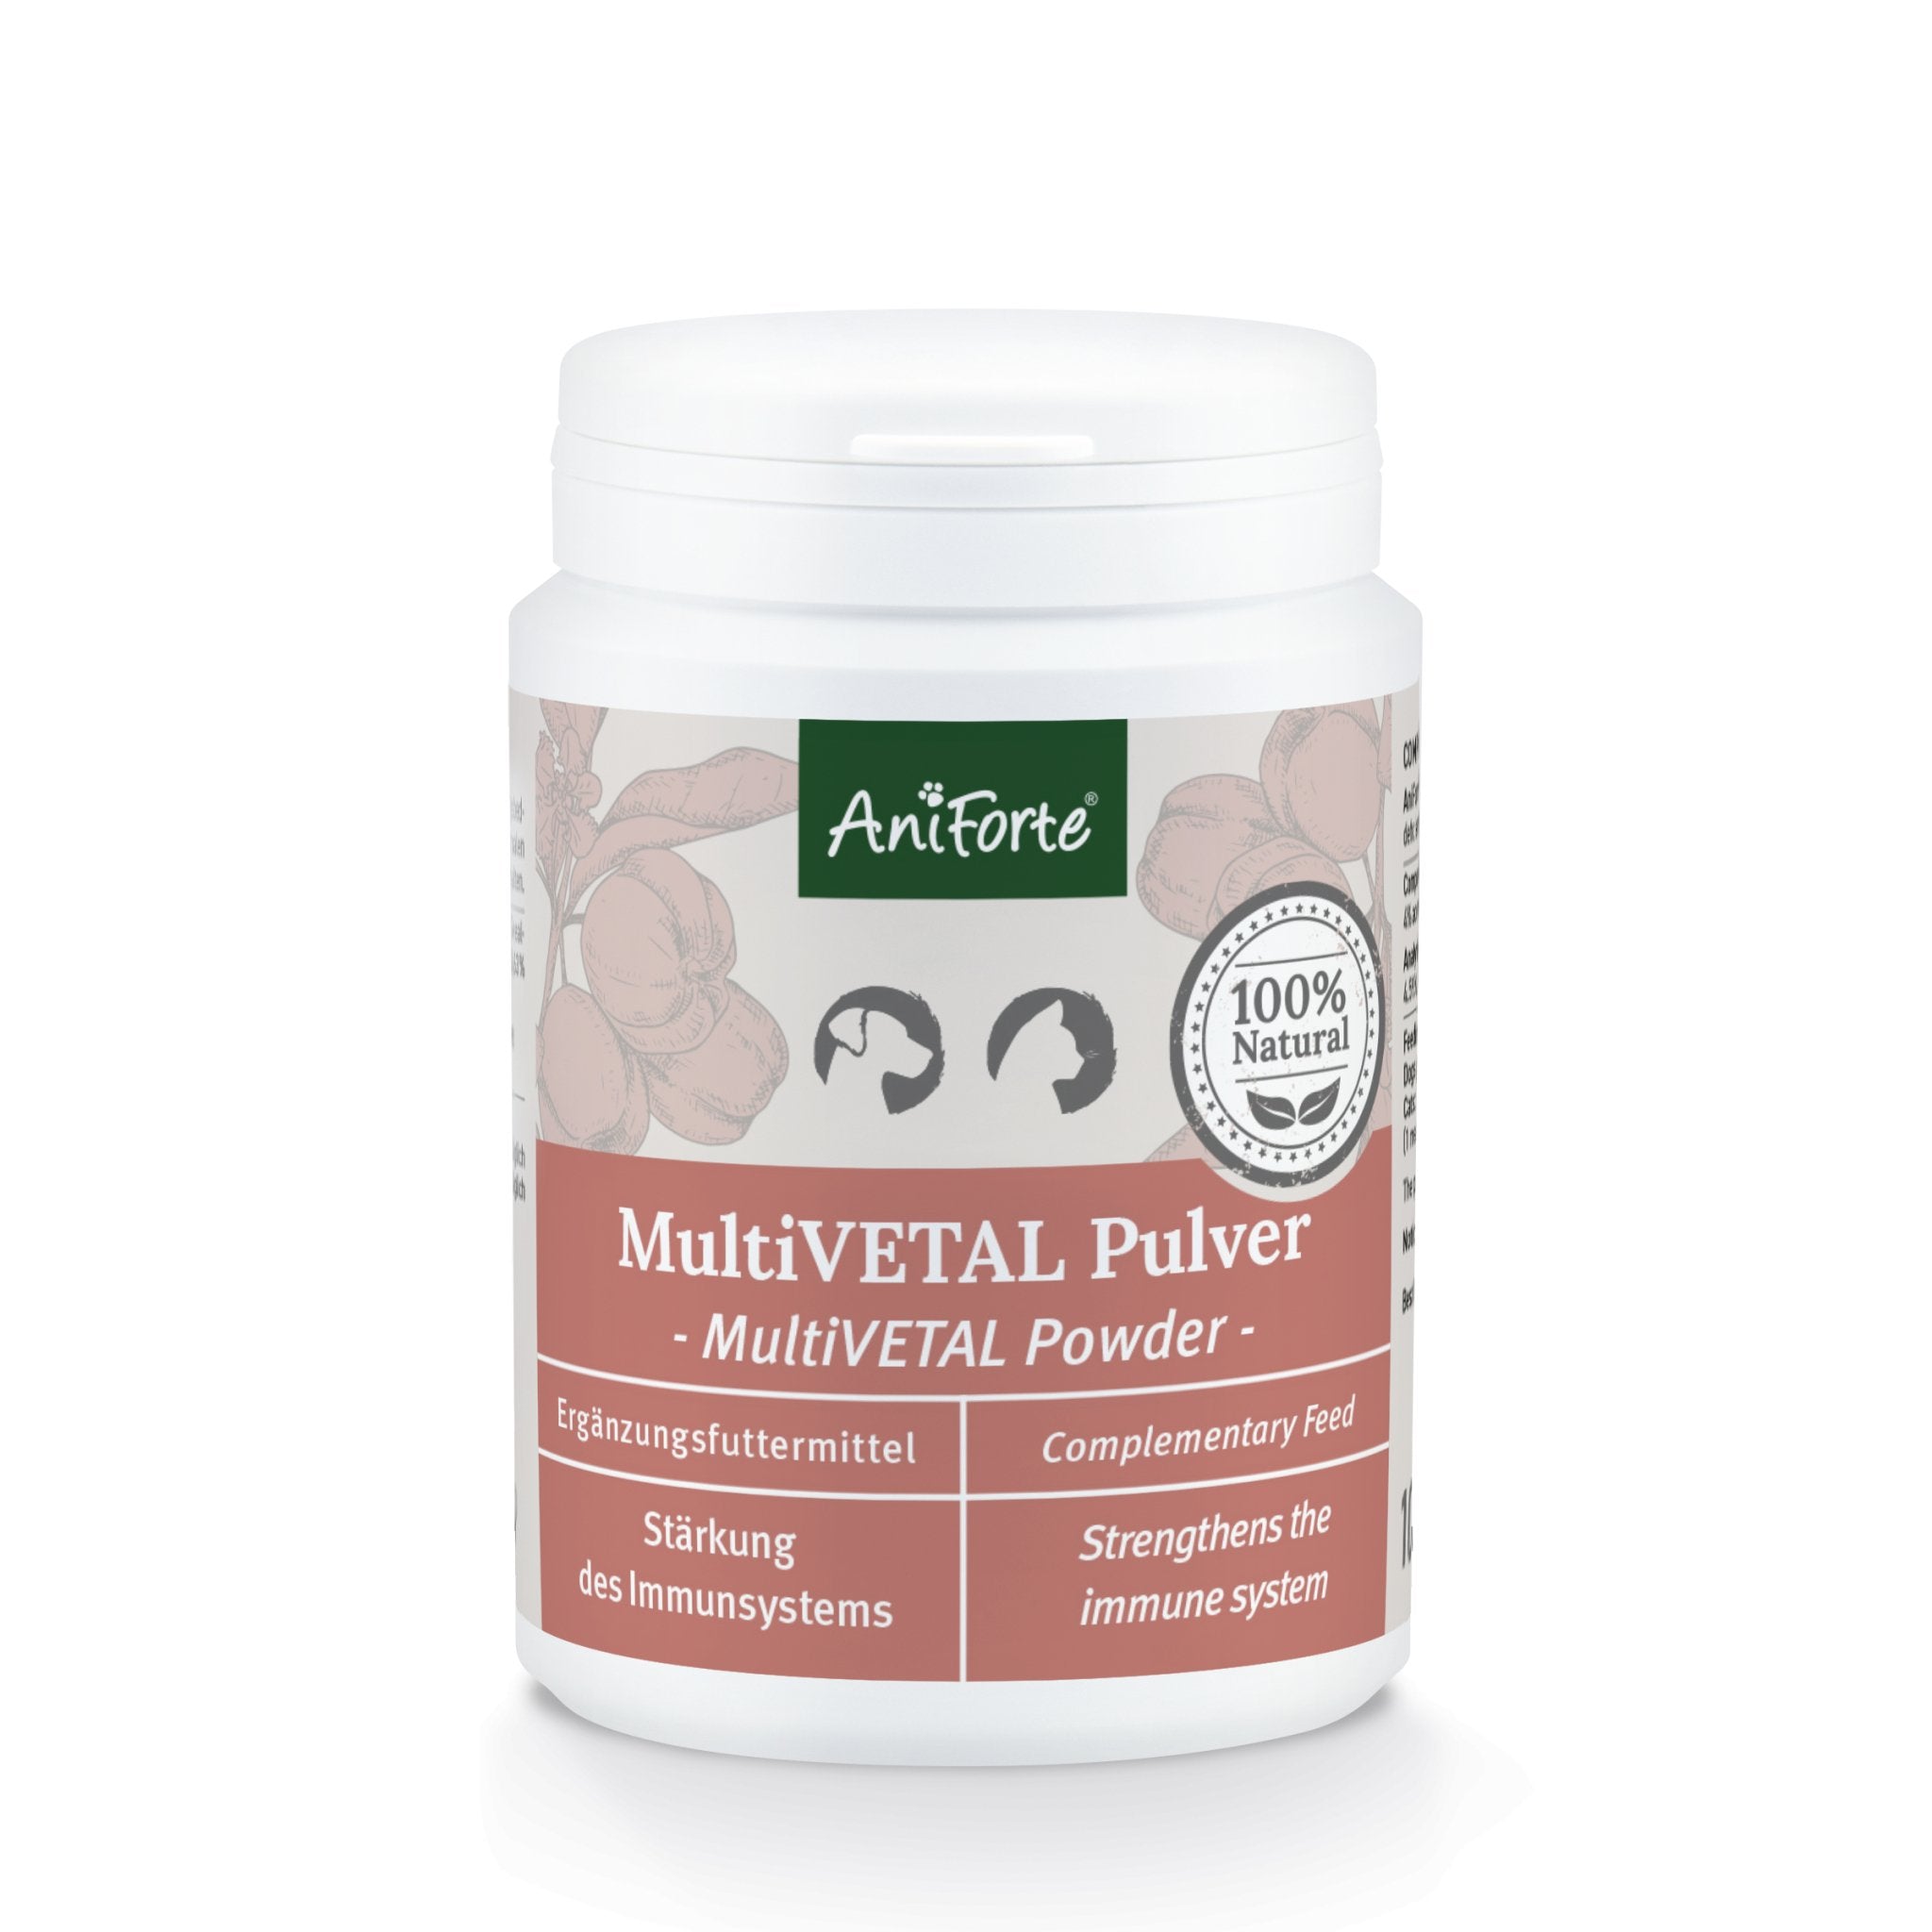 MultiVETAL Powder 100g - Natural Vitamin and Mineral Supplement for Dogs & Cats - AniForte UK